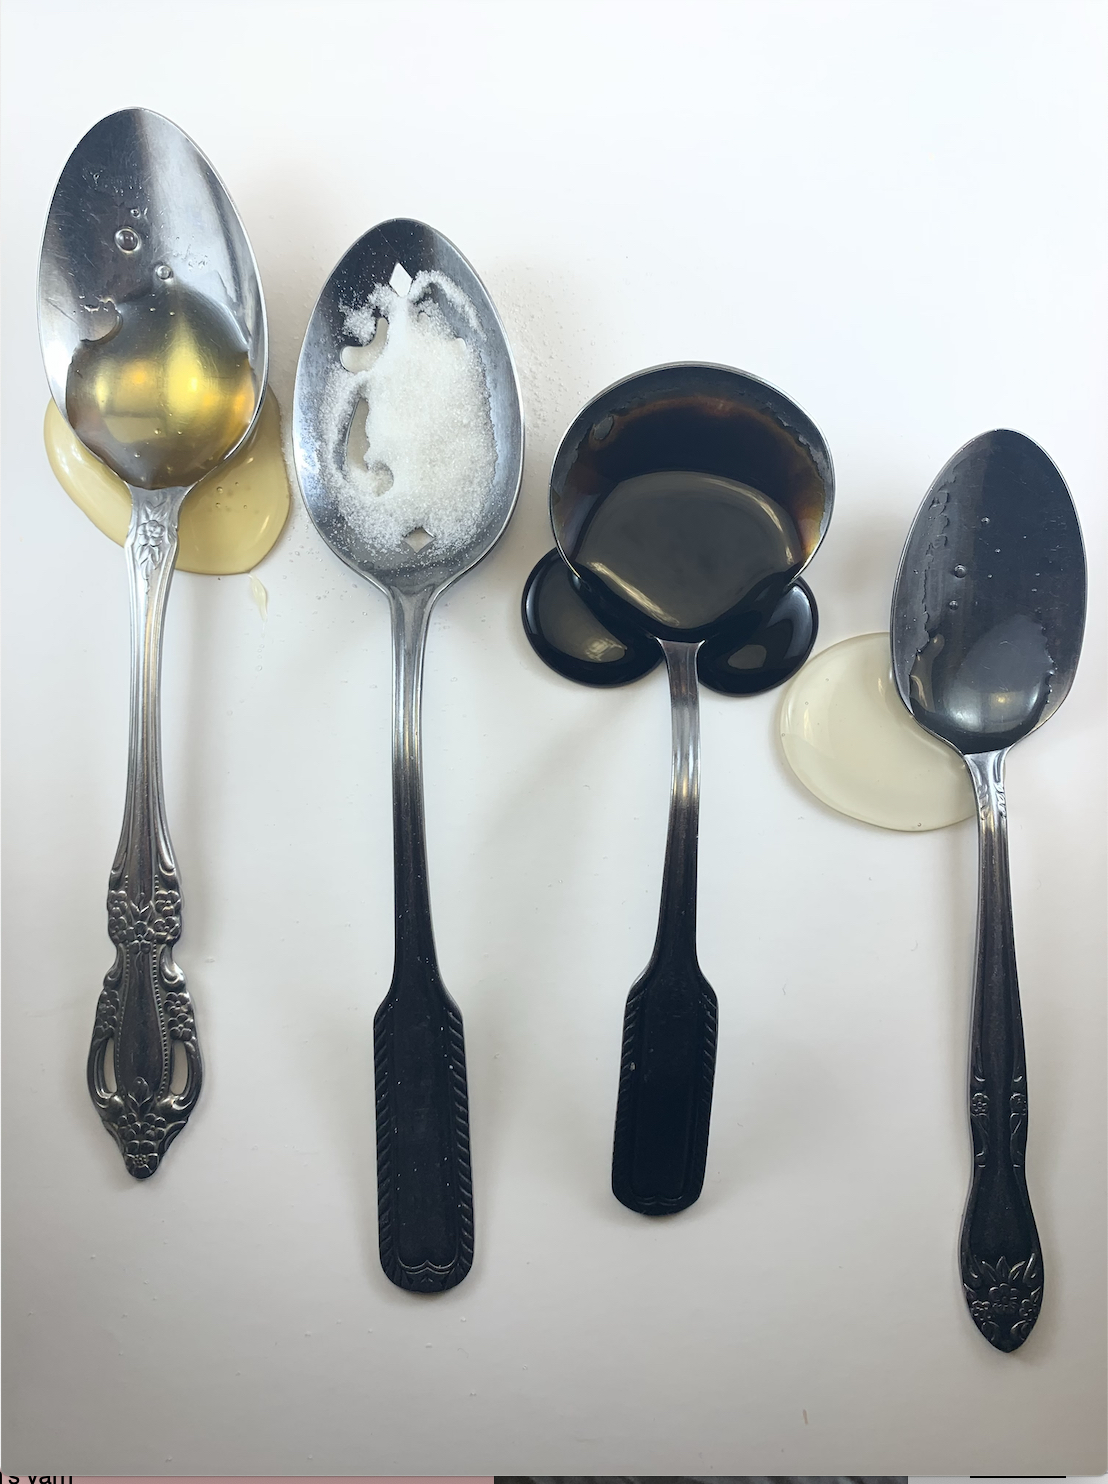 Four spoons on a white surface. Each spoon holds a different pool of liquid